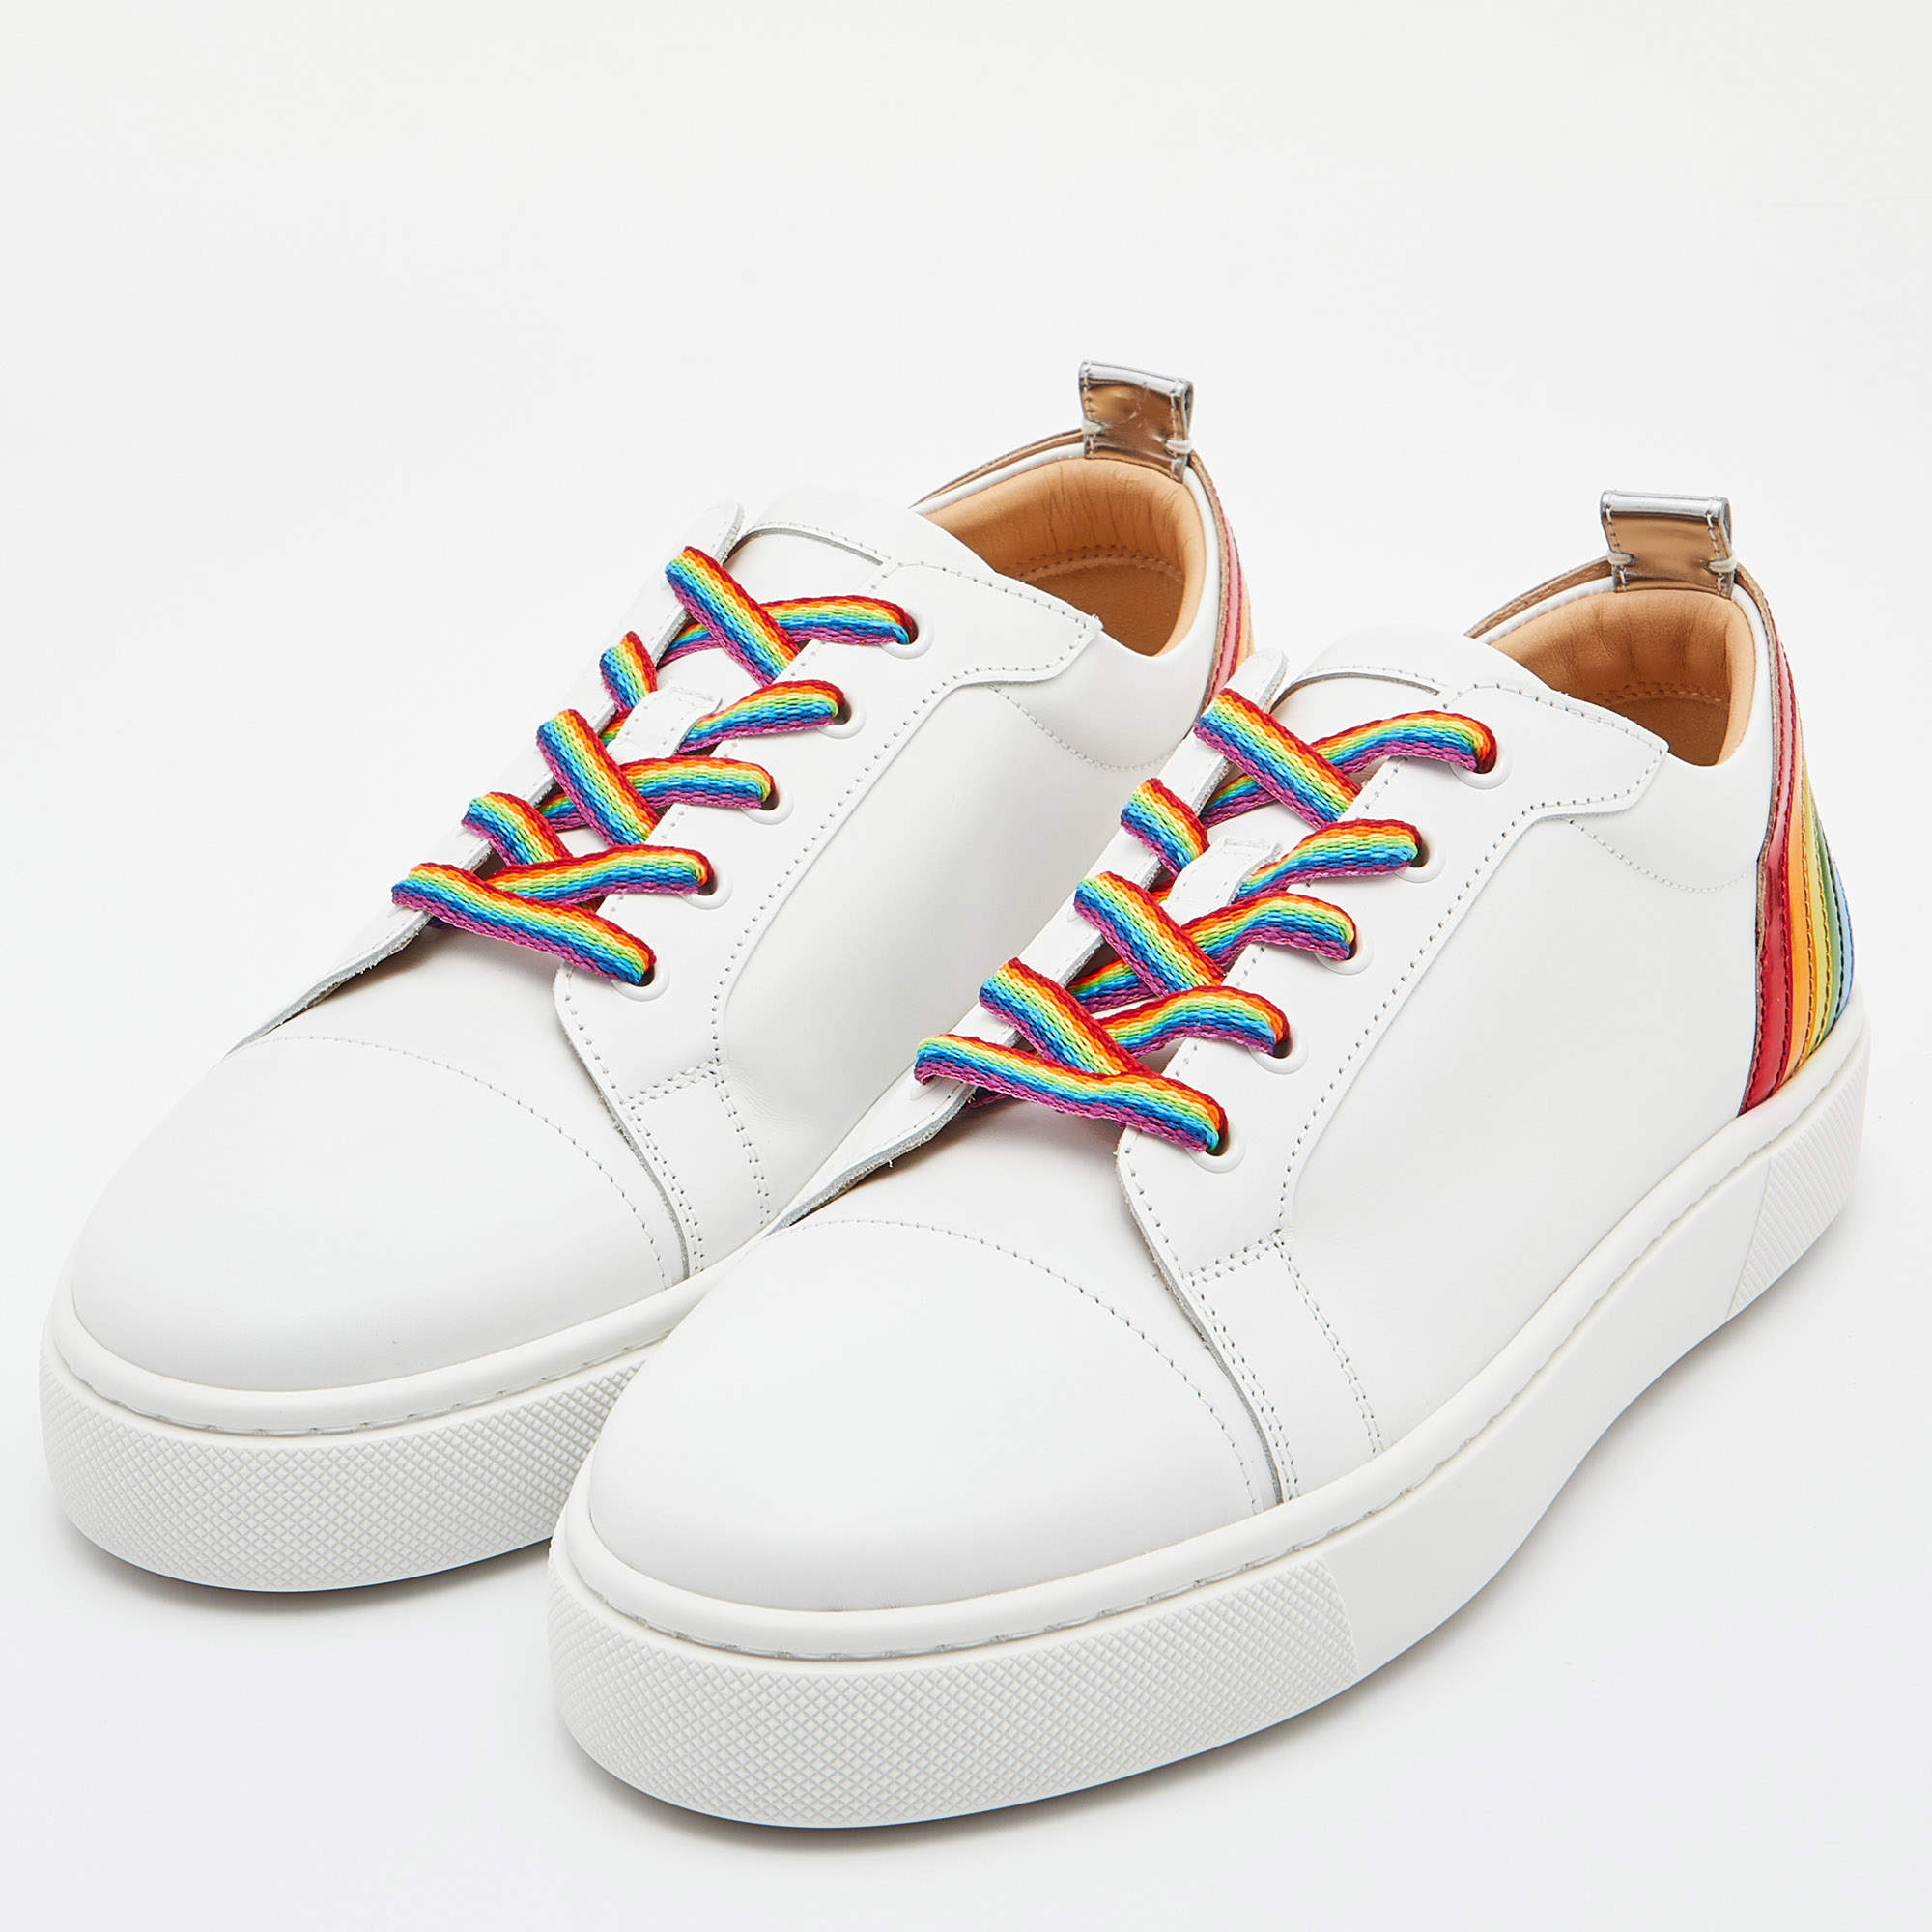 Christian Louboutin - Arkenspeed Rainbow Leather Trainers - Womens - White Multi